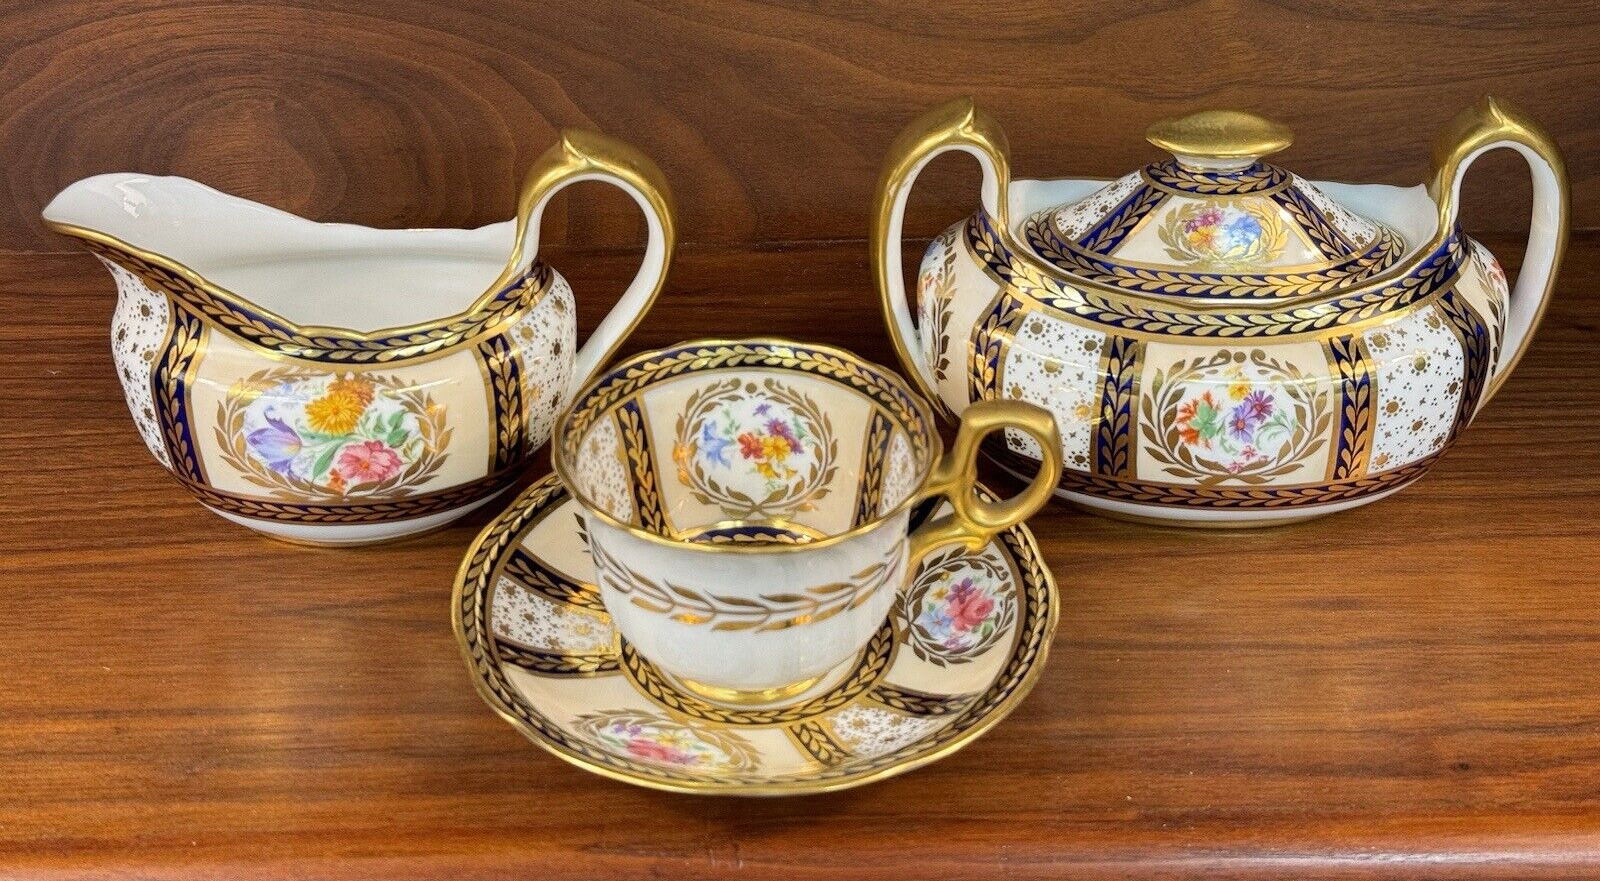 Royal Paragon Creamer & Sugar Set, Queen Mary Service #8902, Signed Holdcroft